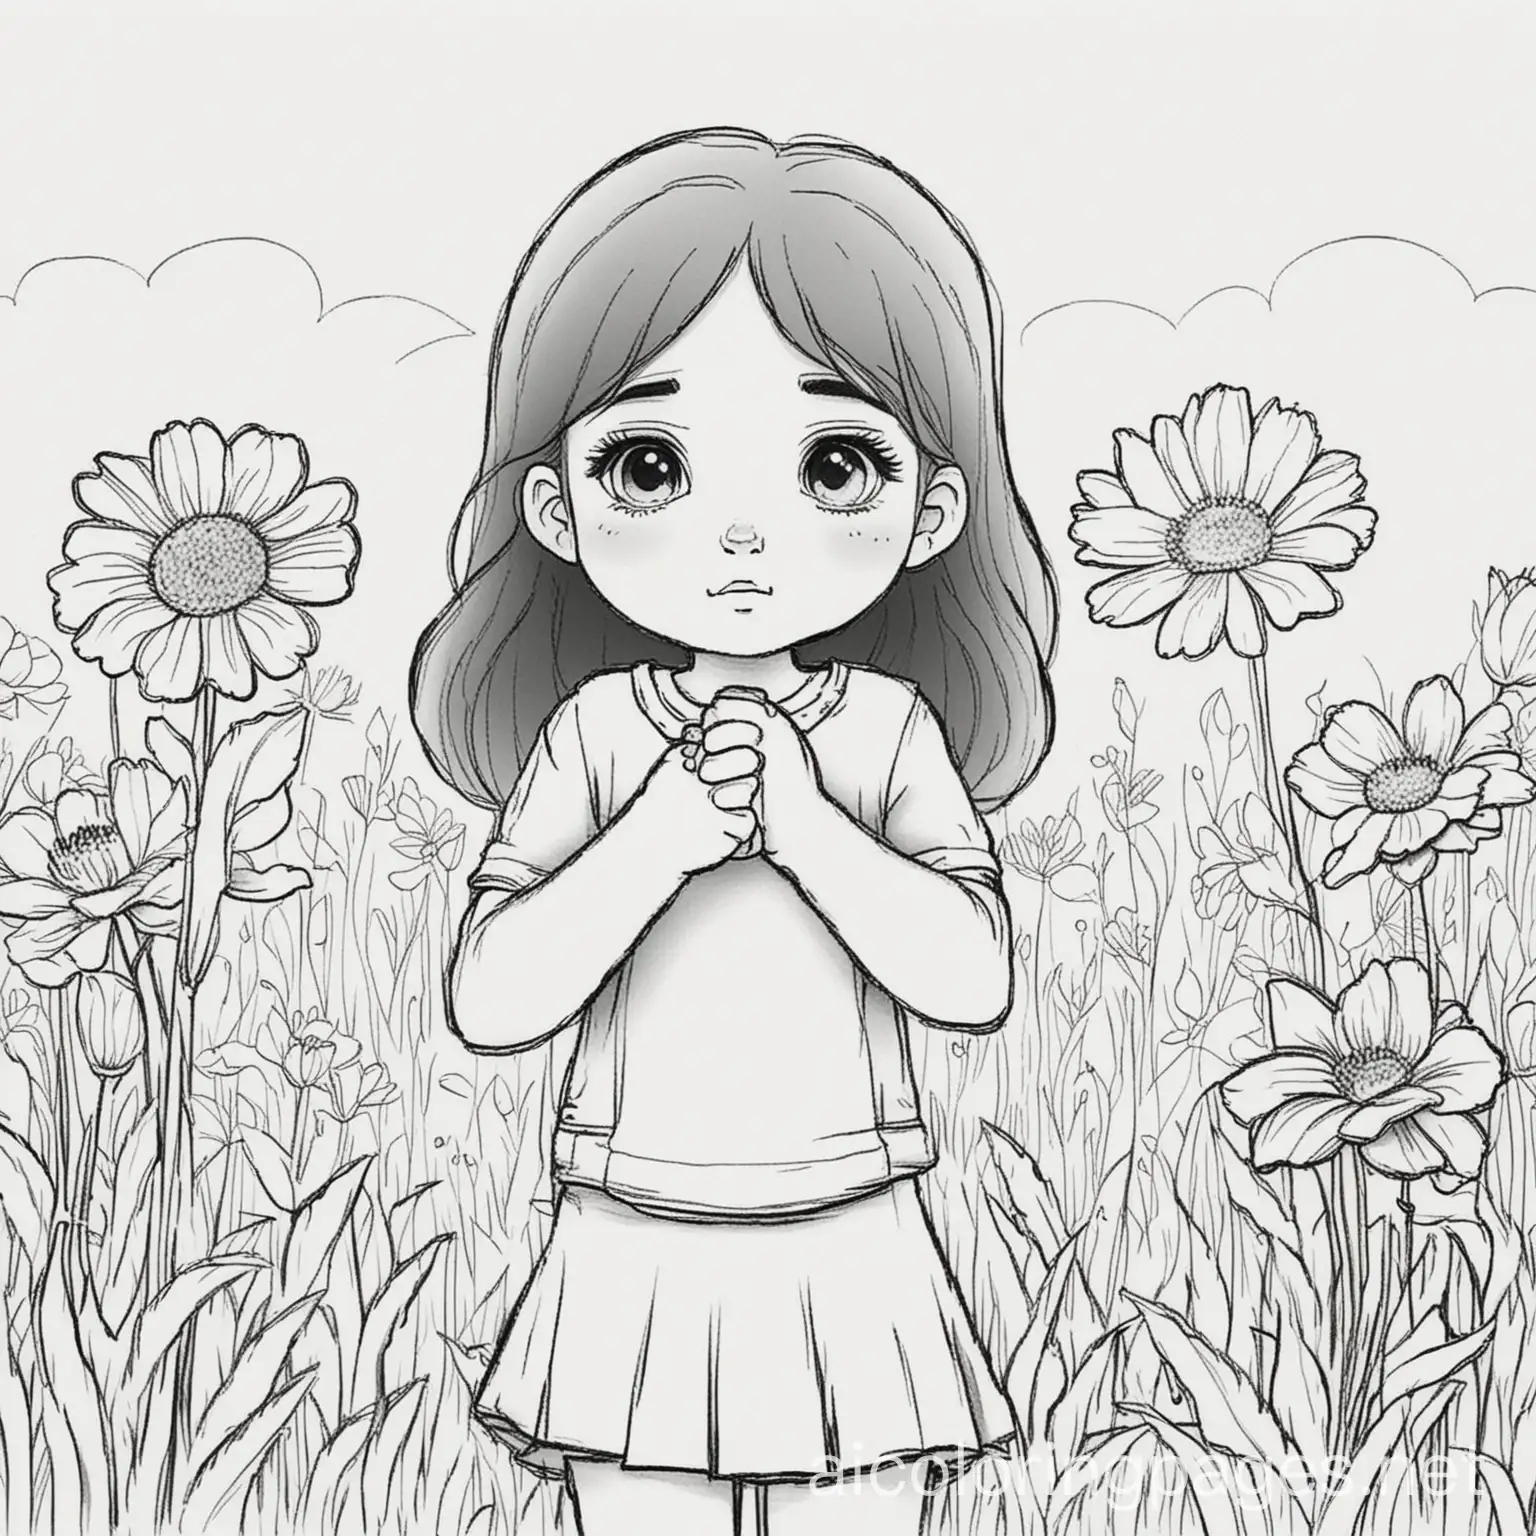 A girl standing with her fists up to her eyes crying. She’s standing on grass with big flowers. Coloring Page, black and white, line art, white background, Simplicity, Ample White Space. The background of the coloring page is plain white to make it easy for young children to color within the lines. The outlines of all the subjects are easy to distinguish, making it simple for kids to color without too much difficulty, Coloring Page, black and white, line art, white background, Simplicity, Ample White Space. The background of the coloring page is plain white to make it easy for young children to color within the lines. The outlines of all the subjects are easy to distinguish, making it simple for kids to color without too much difficulty